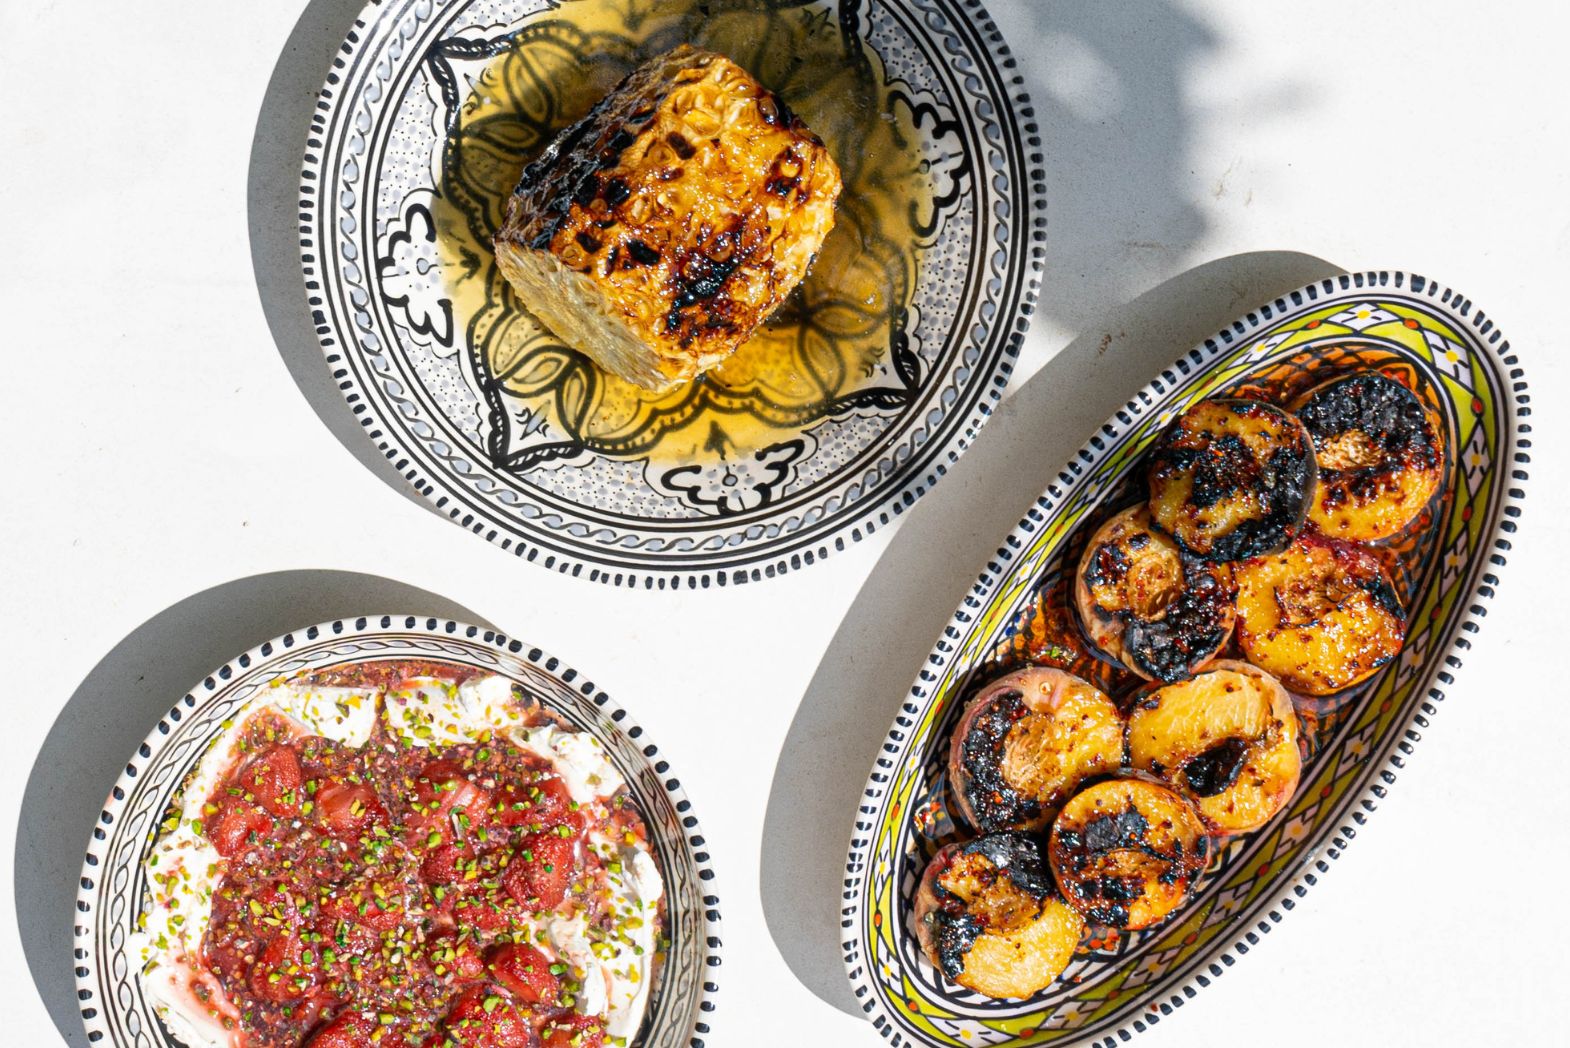 Delicious BBQ Desserts: Grilled Pineapple, Peaches and Strawberries...